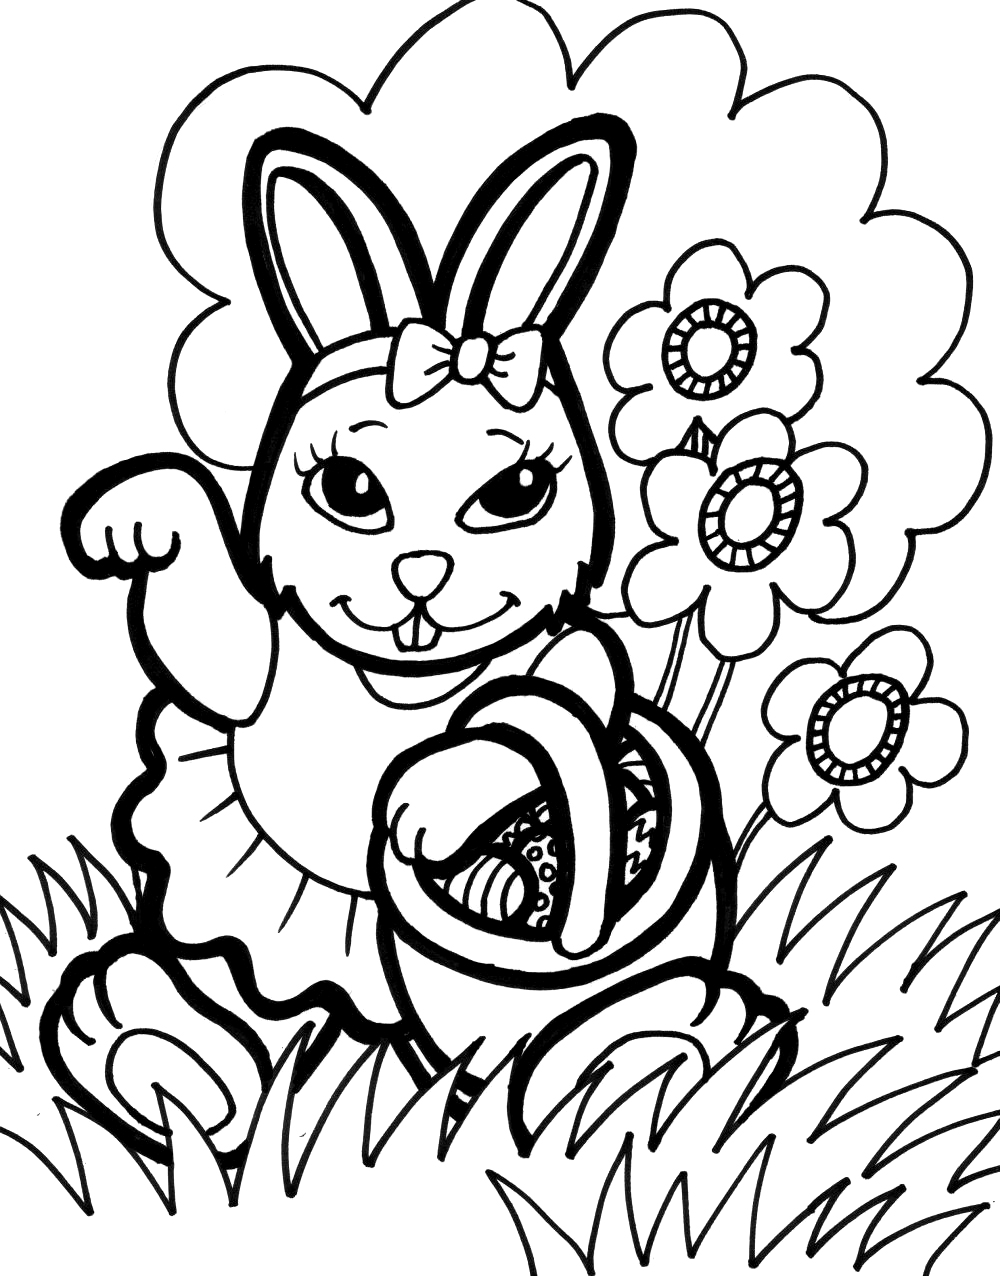 Download Bunny Coloring Pages Best Coloring Pages For Kids